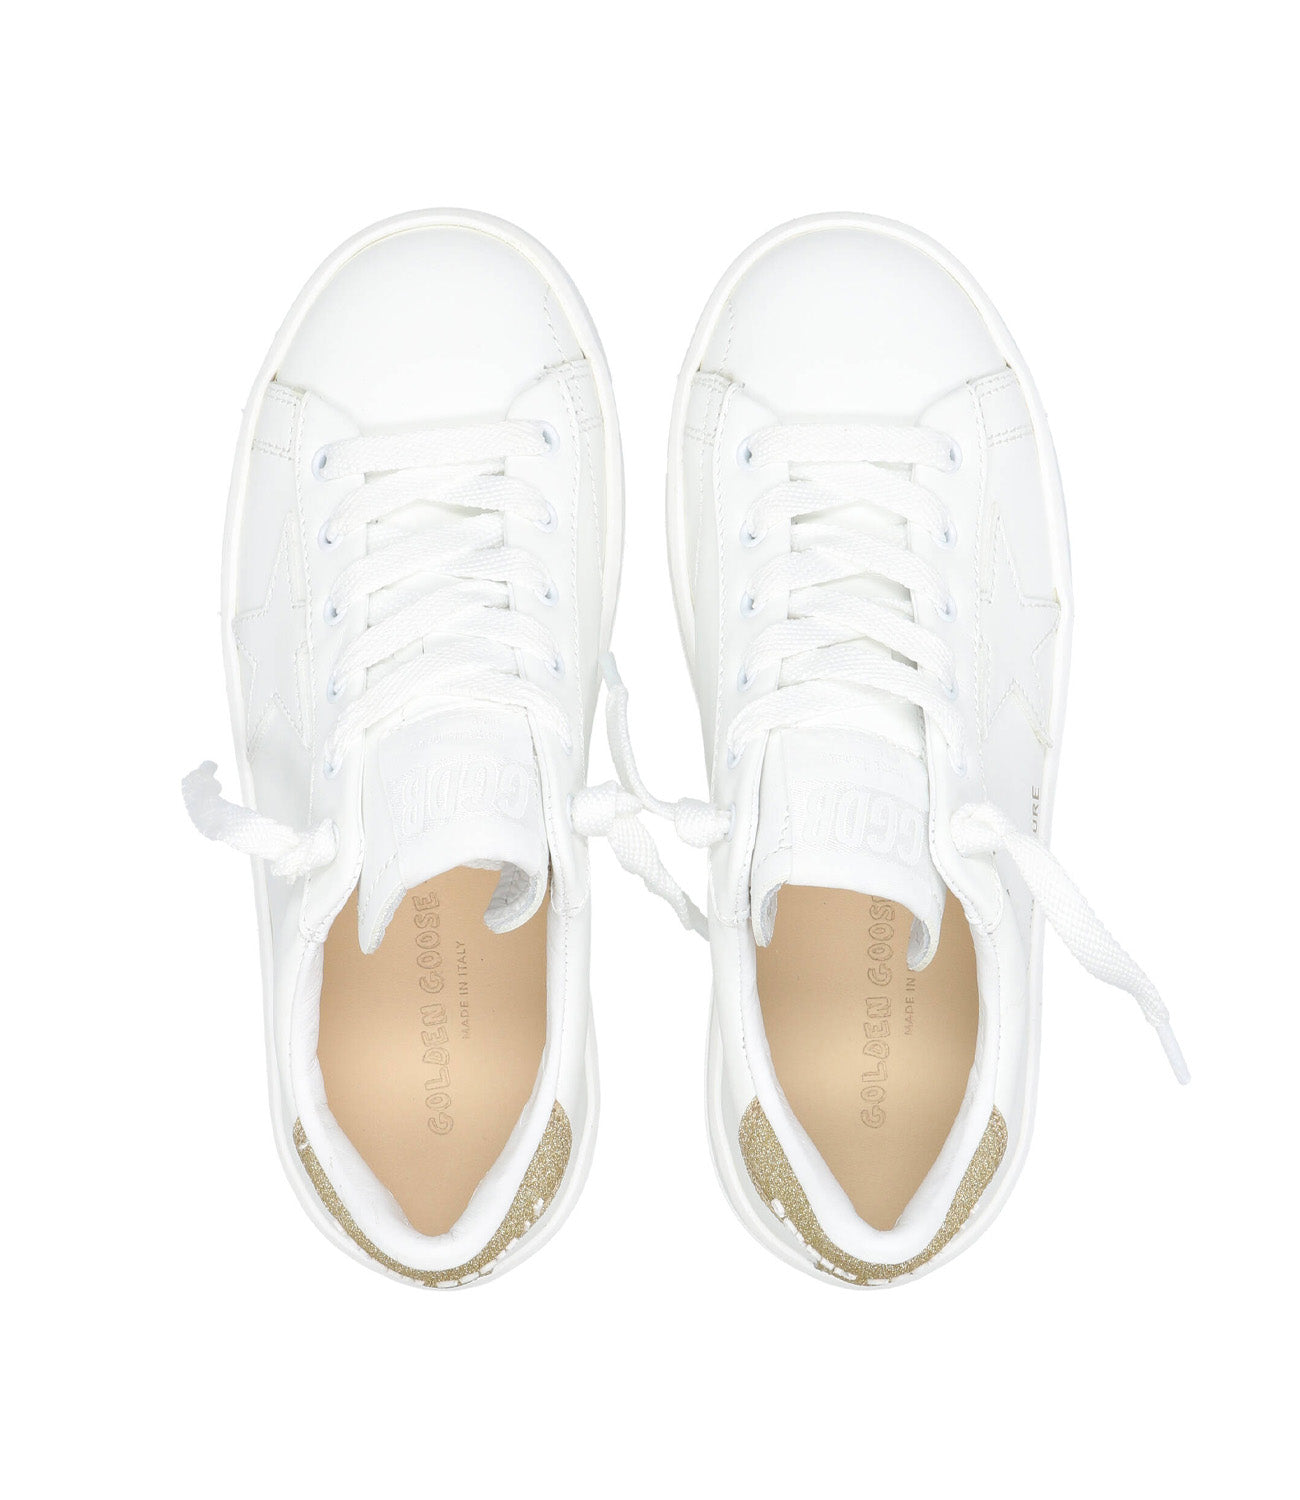 Golden Goose Deluxe Brand | Purestar Sneakers White and Gold